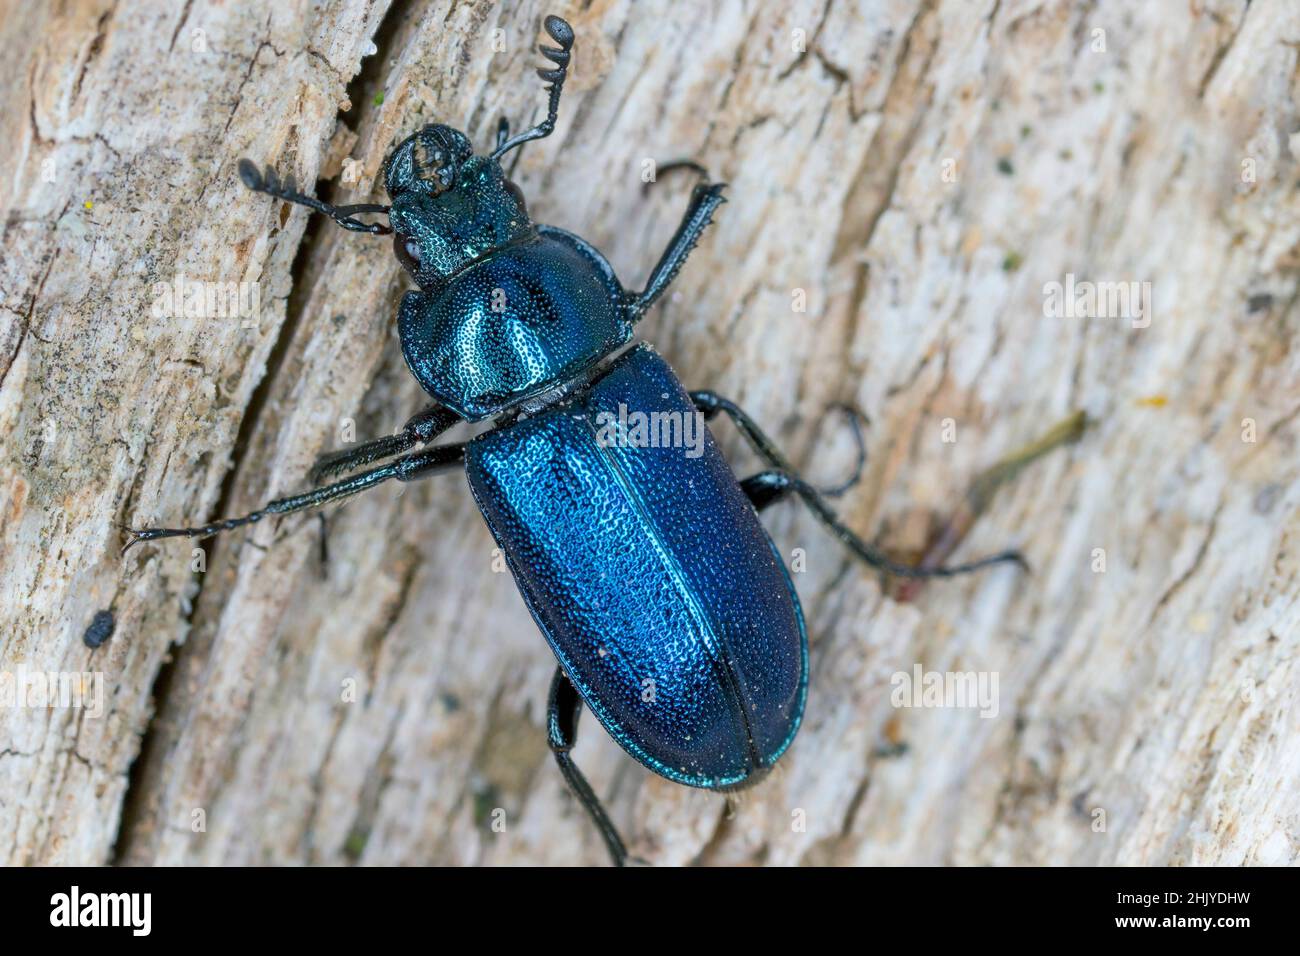 Stag beetle (Lucanidae) - Platycerus caraboides. Stock Photo